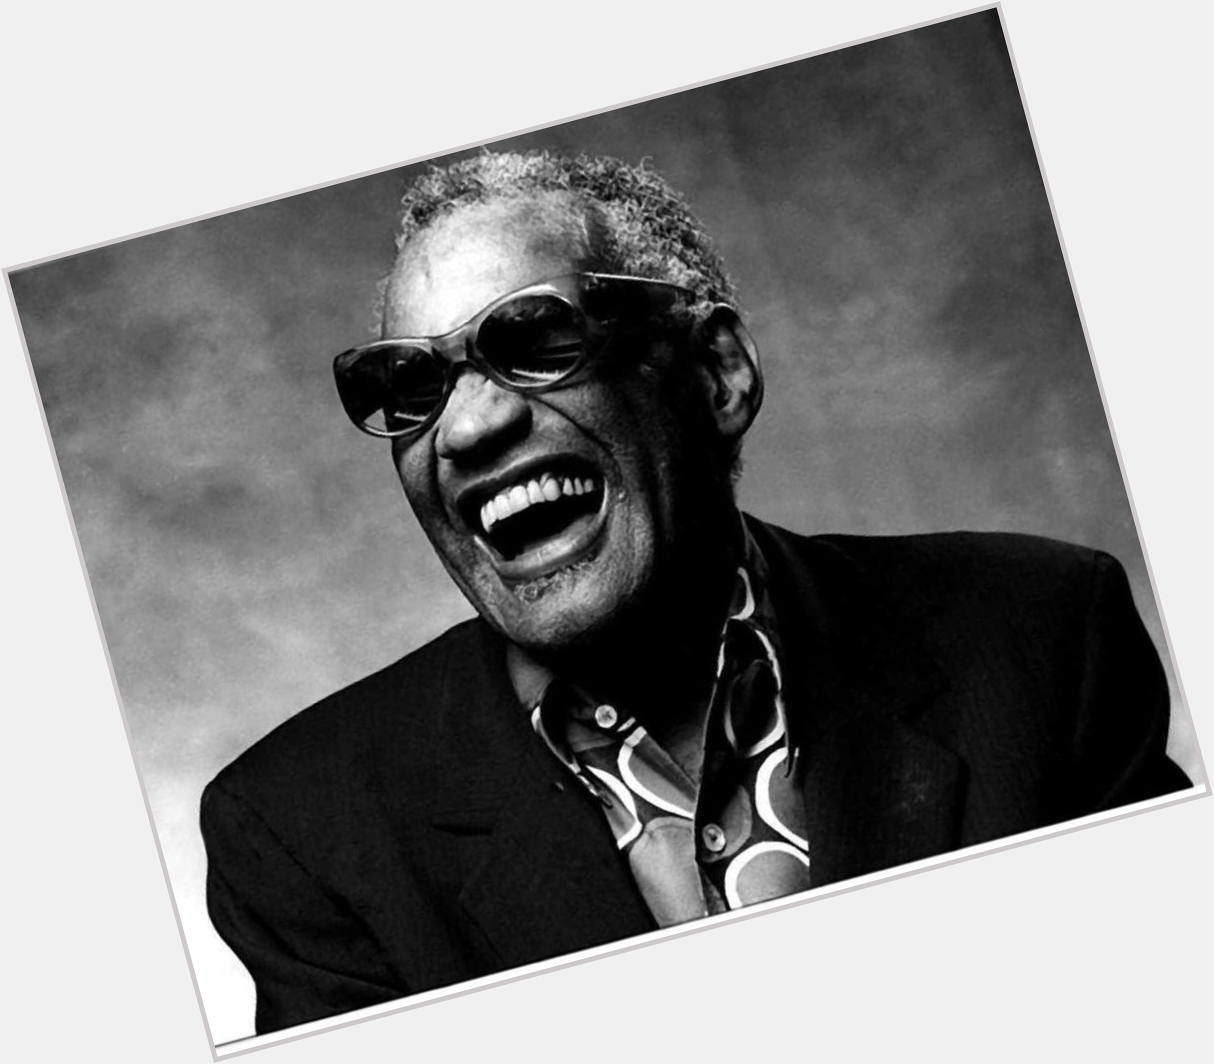  :  | Also Happy Birthday to my favorite singer Ray Charles. He 